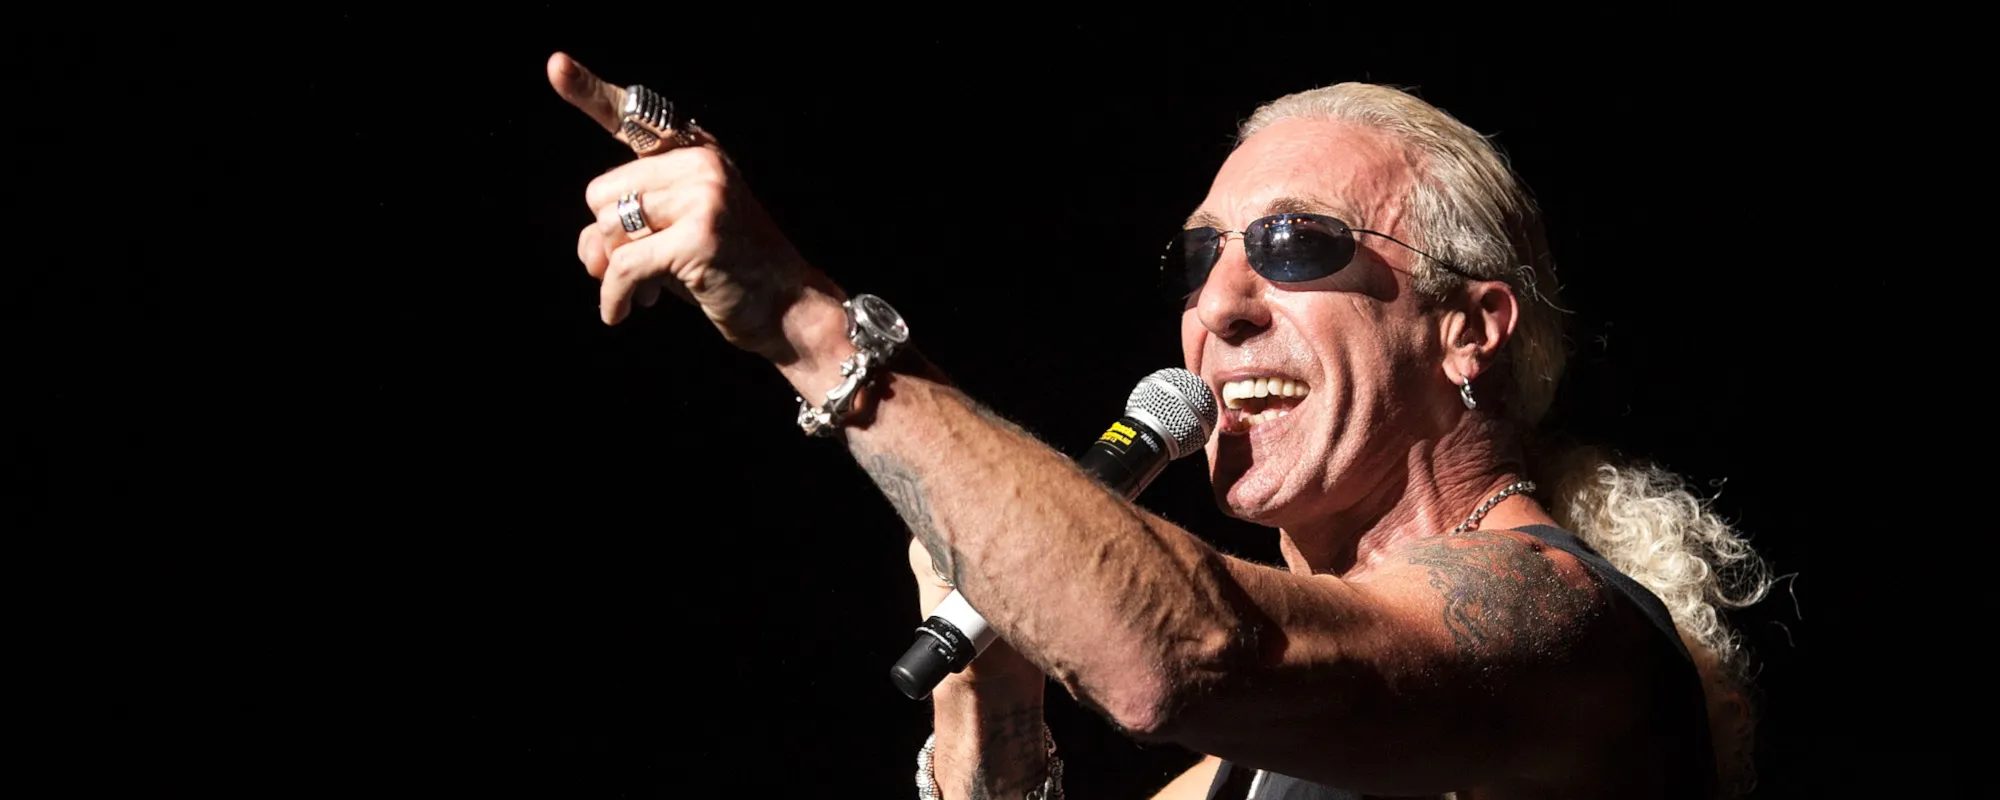 Dee Snider Says He Would Sing “We’re Not Gonna Take It” for Beto O’Rourke’s Campaign